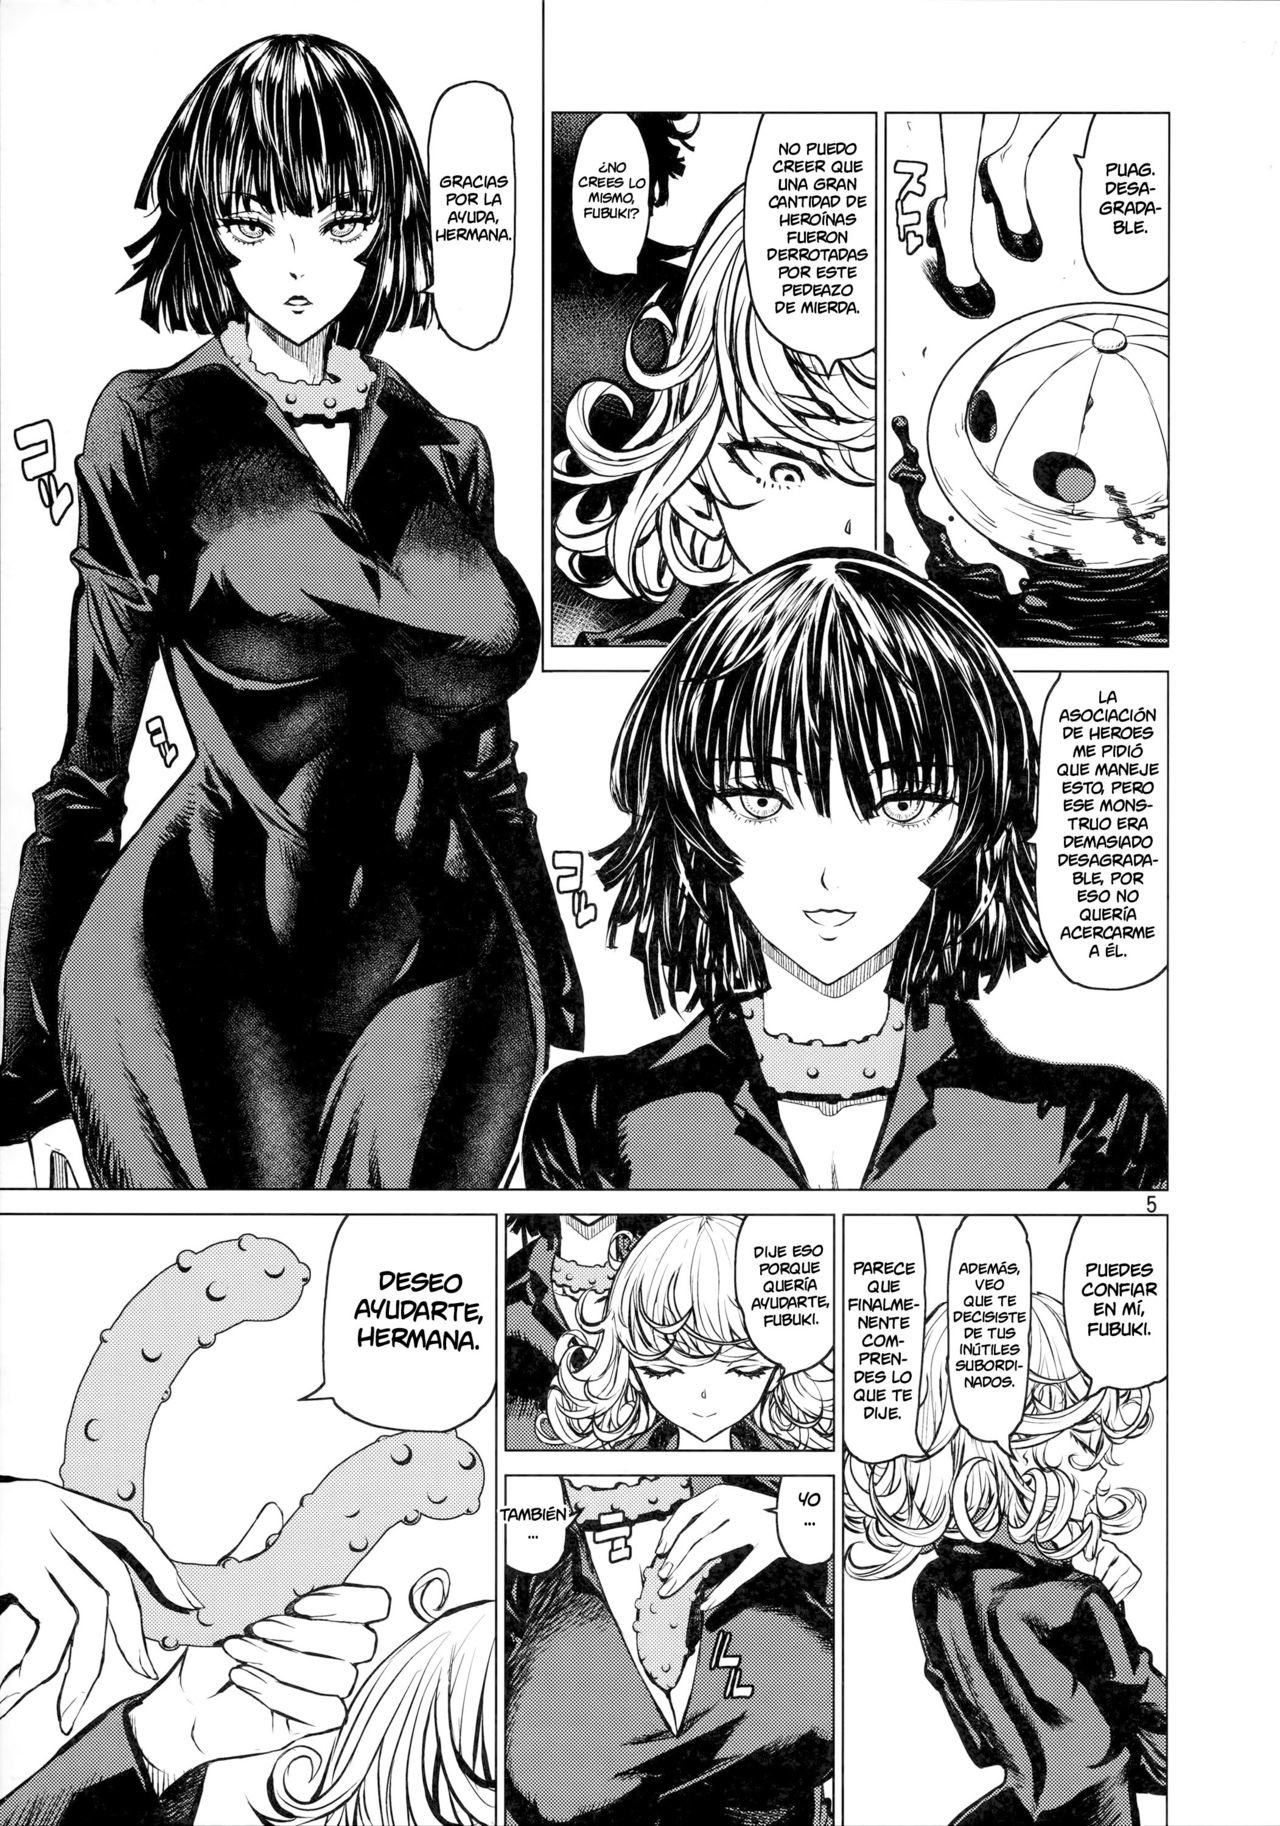 Disaster Sisters Leopard Hon 25 (One Punch Man) [Spanish] [NILG] - 3